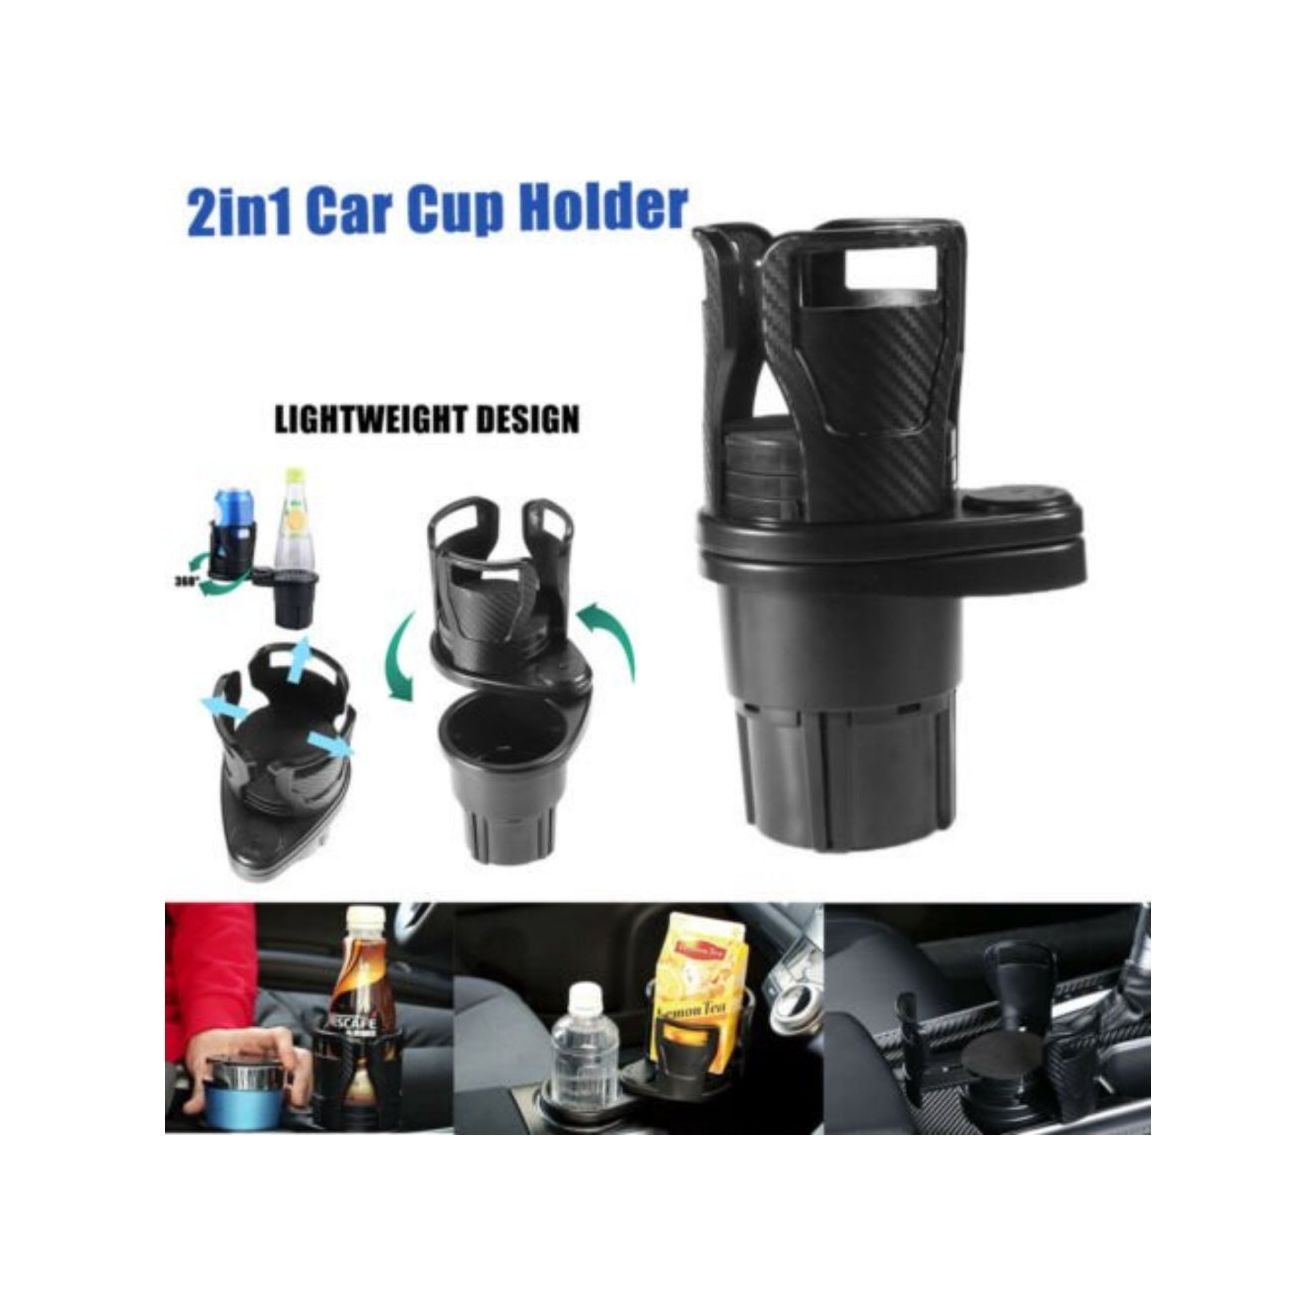 2-in-1 Multifunction Car Drink Expander Adapter, All Purpose Car Cup Holder Expander with Adjustable, Solar Grass Cup Holder Expander for Most Cars (Cup Holder 2-in-1) Moorescarts